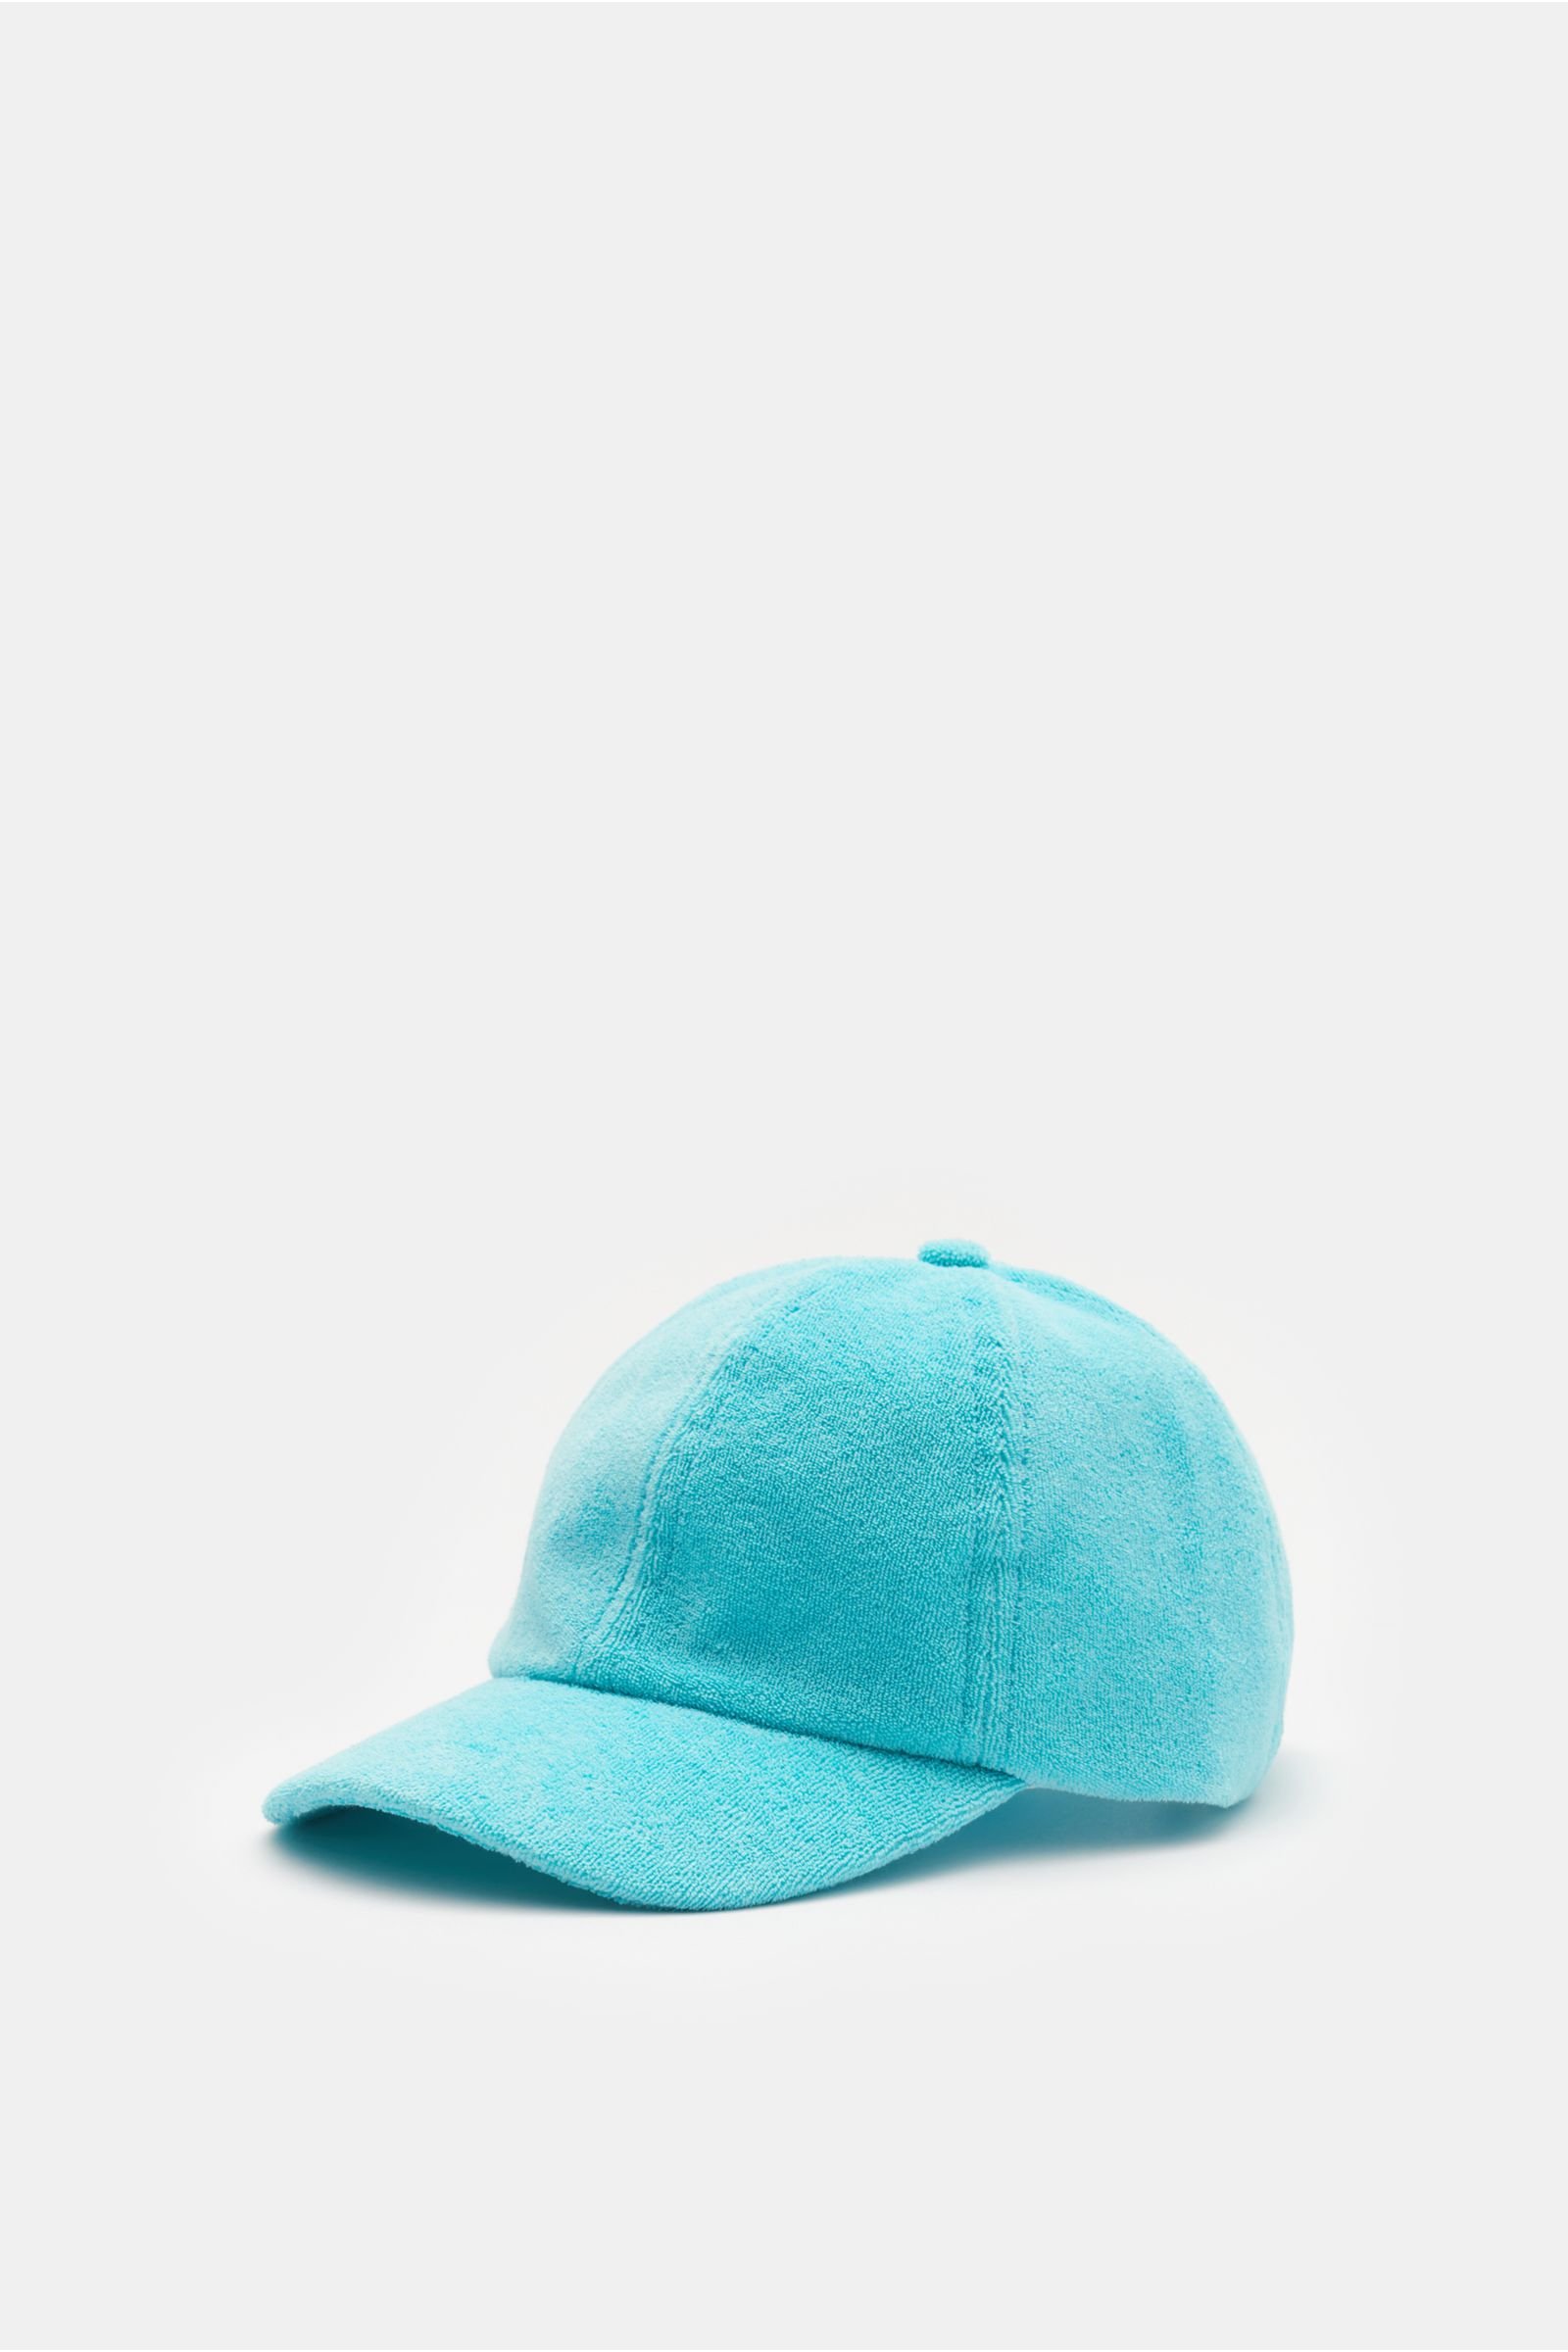 Kids terry cap 'Kids Terry' turquoise